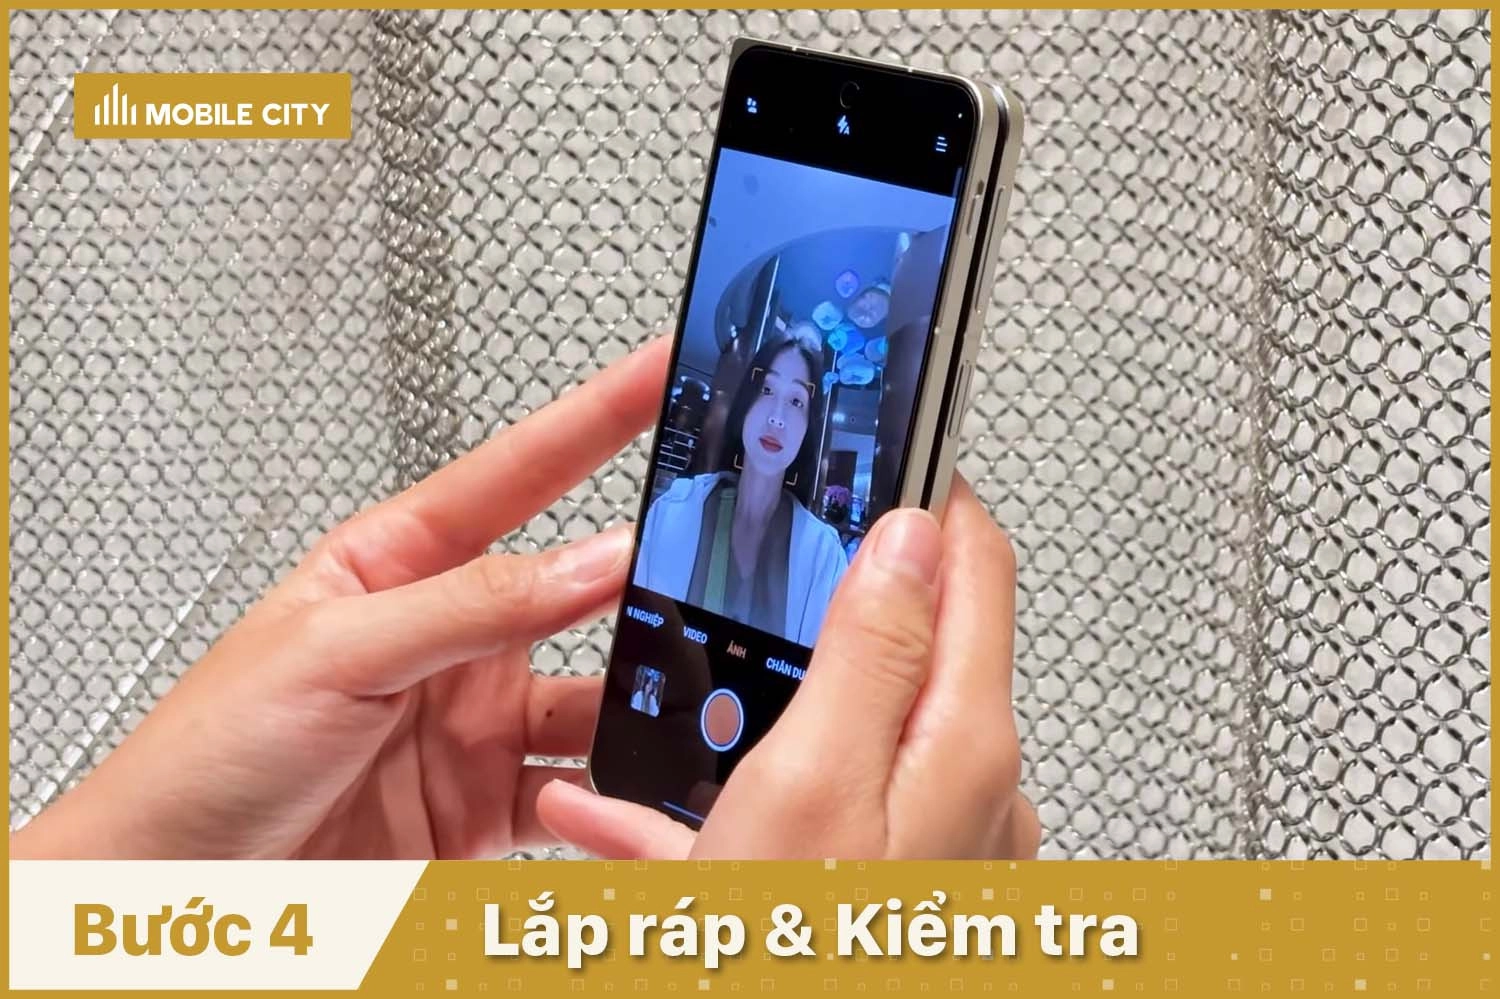 thay-camera-oppo-find-n3-lap-rap-kt